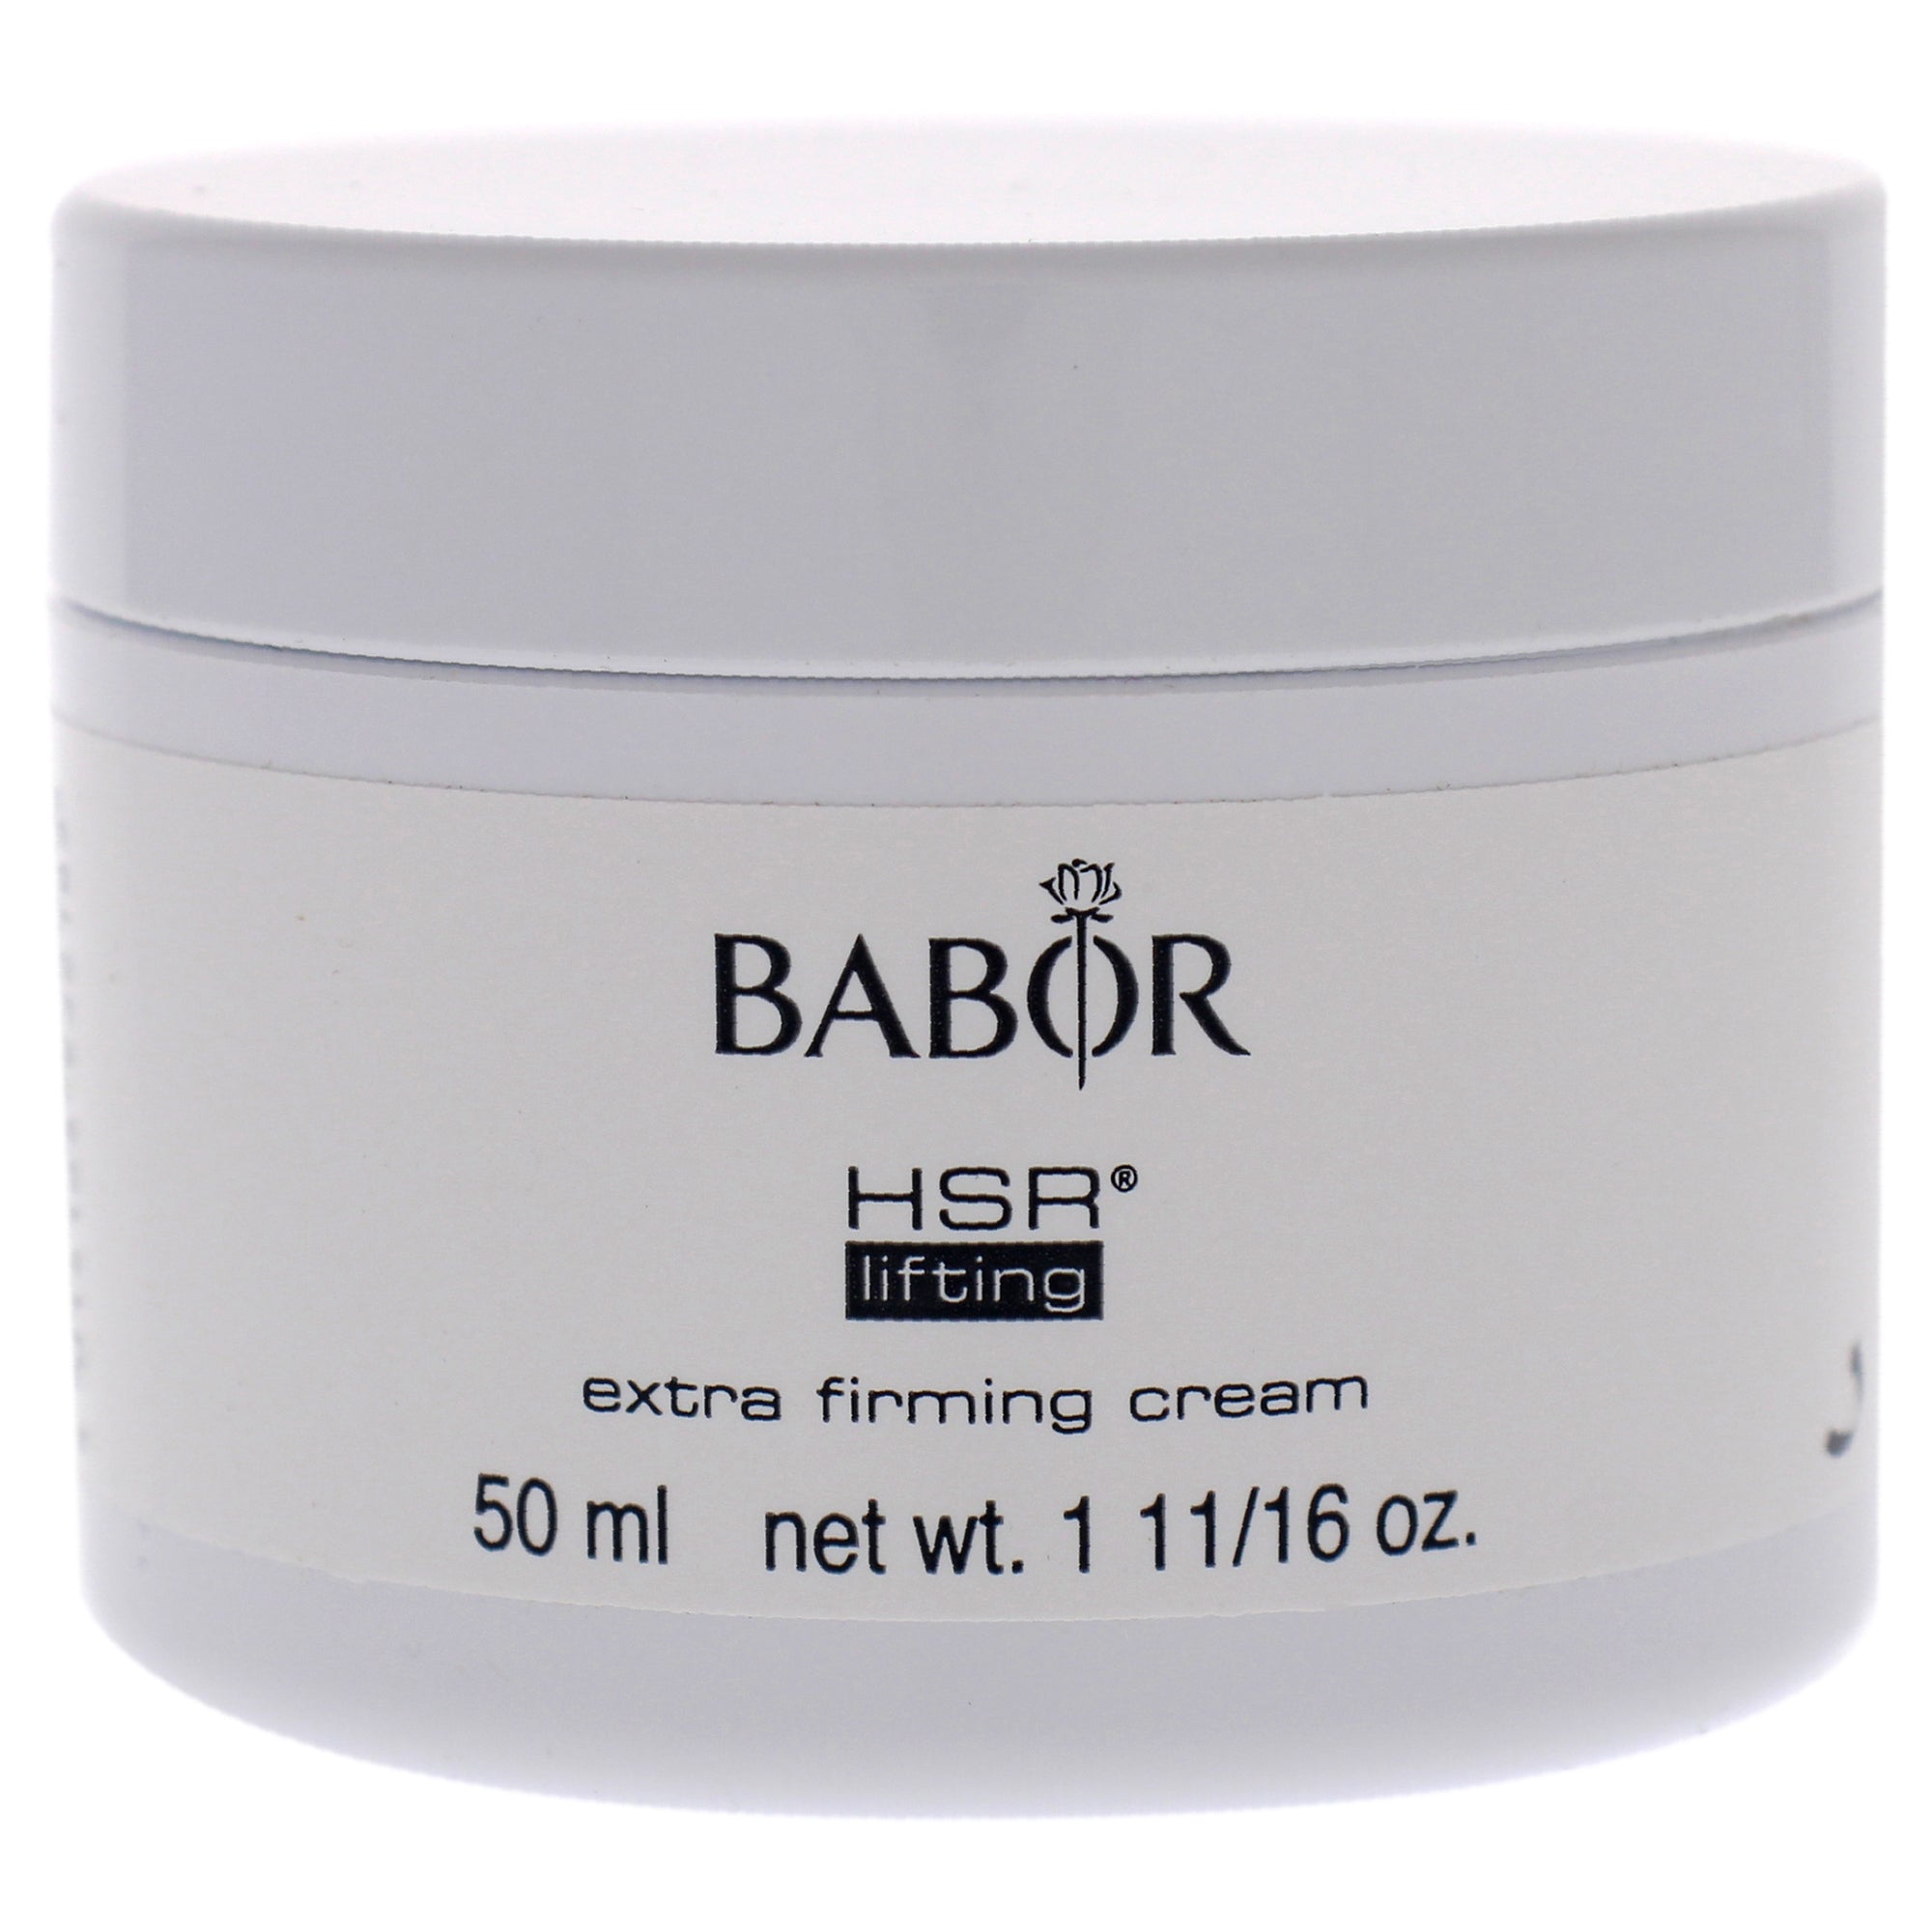 HSR Lifting Extra Firming Cream by Babor for Women - 1.69 oz Cream